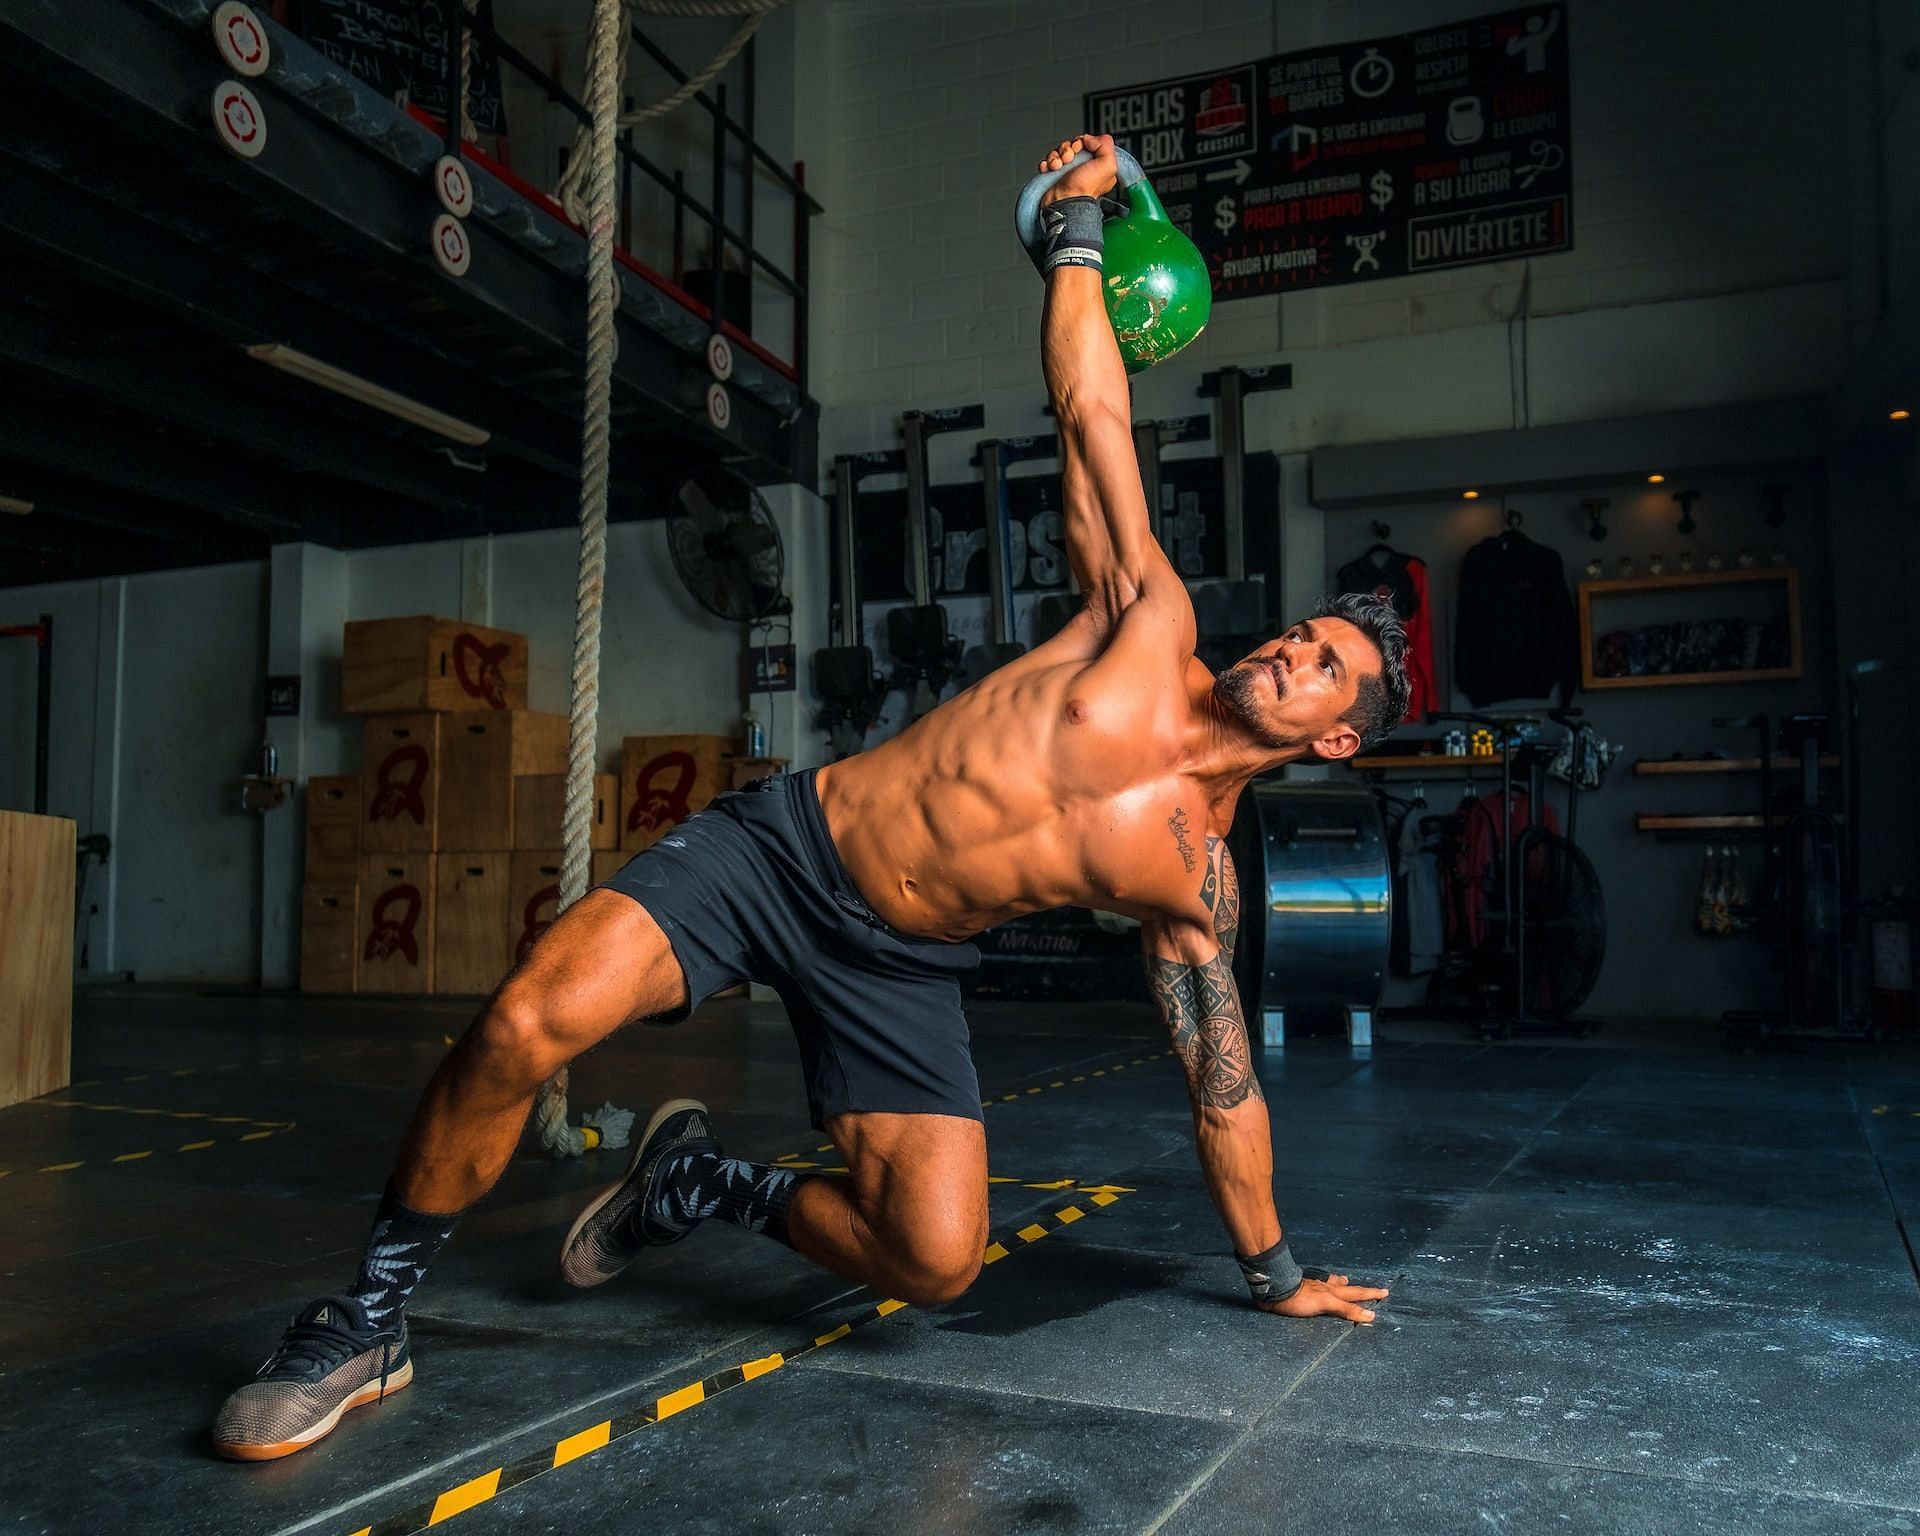 Guide to kettlebell exercises for men to develop and strengthen core muscles. (Photo by Alonso Reyes on Unsplash